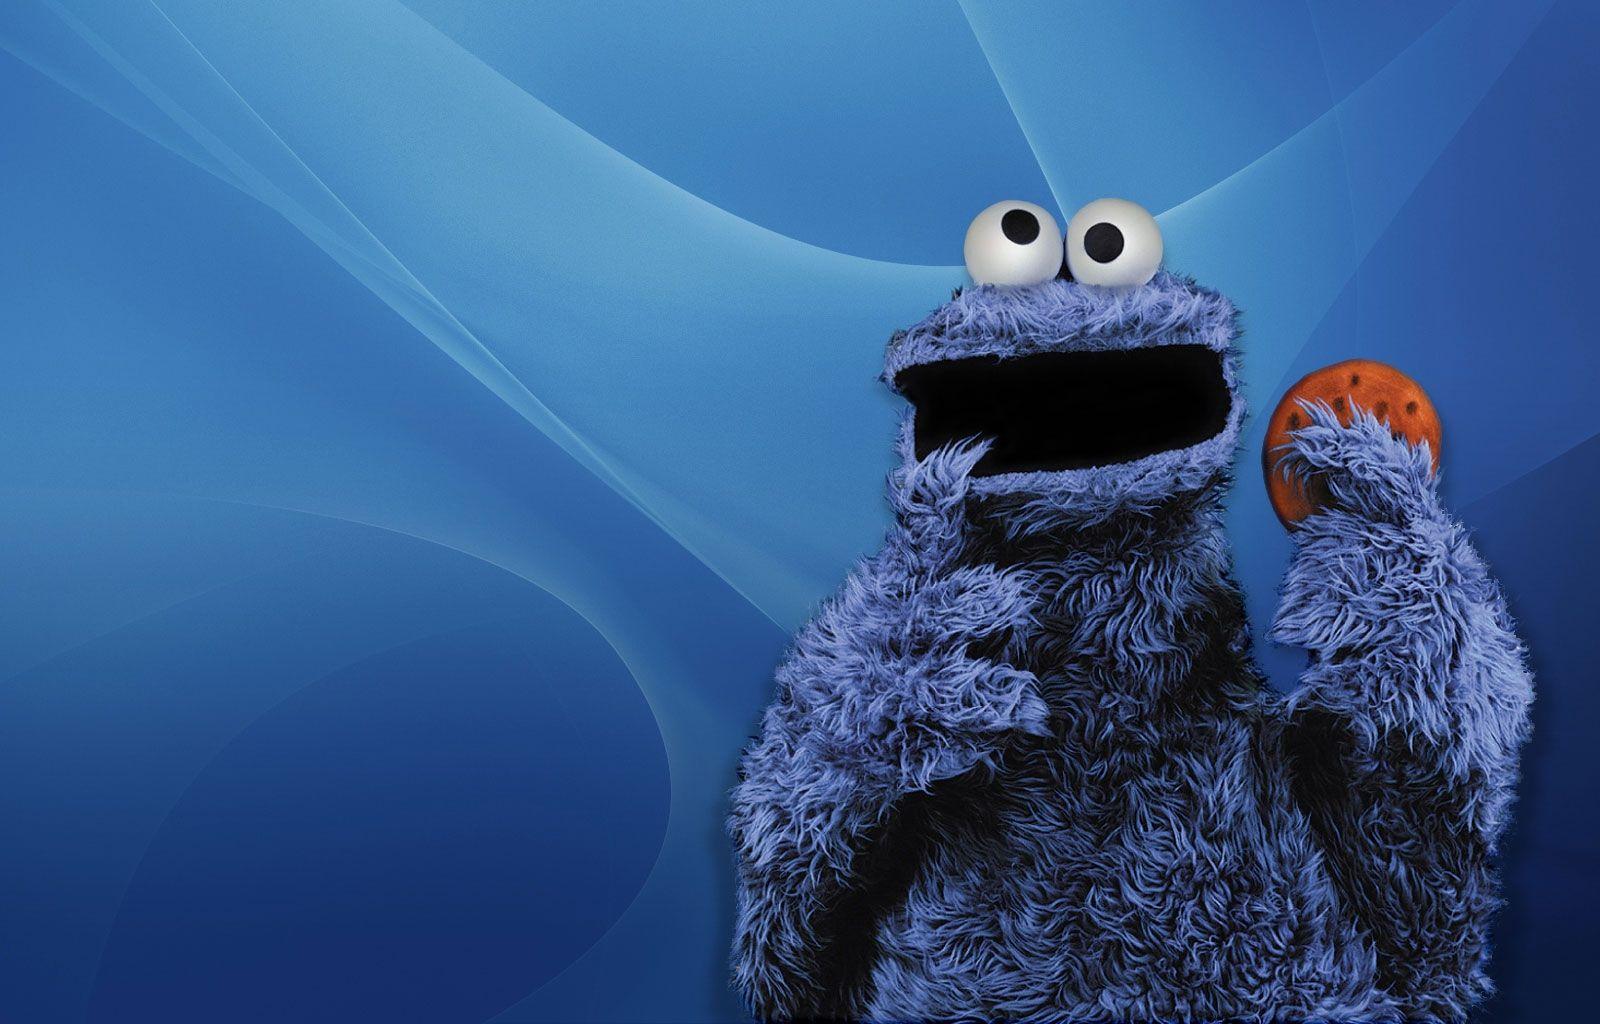 cookies cookie monster l x179 1600x1024 wallpaper High Quality